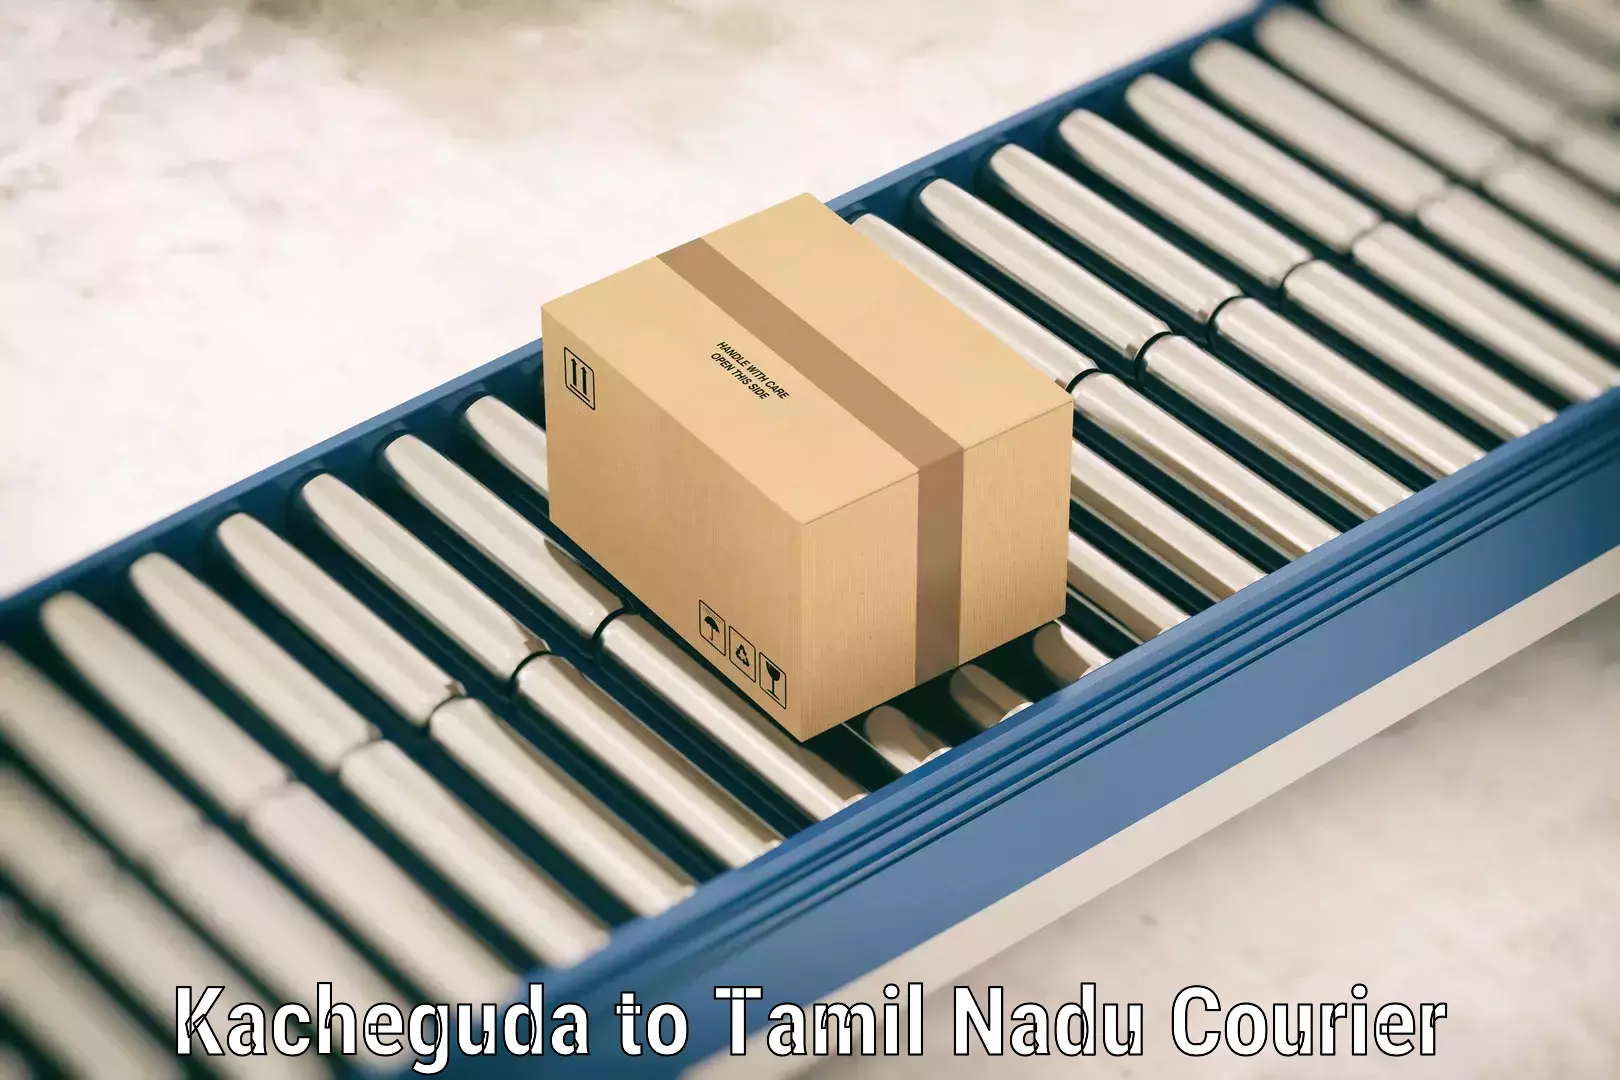 Door-to-door baggage service Kacheguda to Meenakshi Academy of Higher Education and Research Chennai